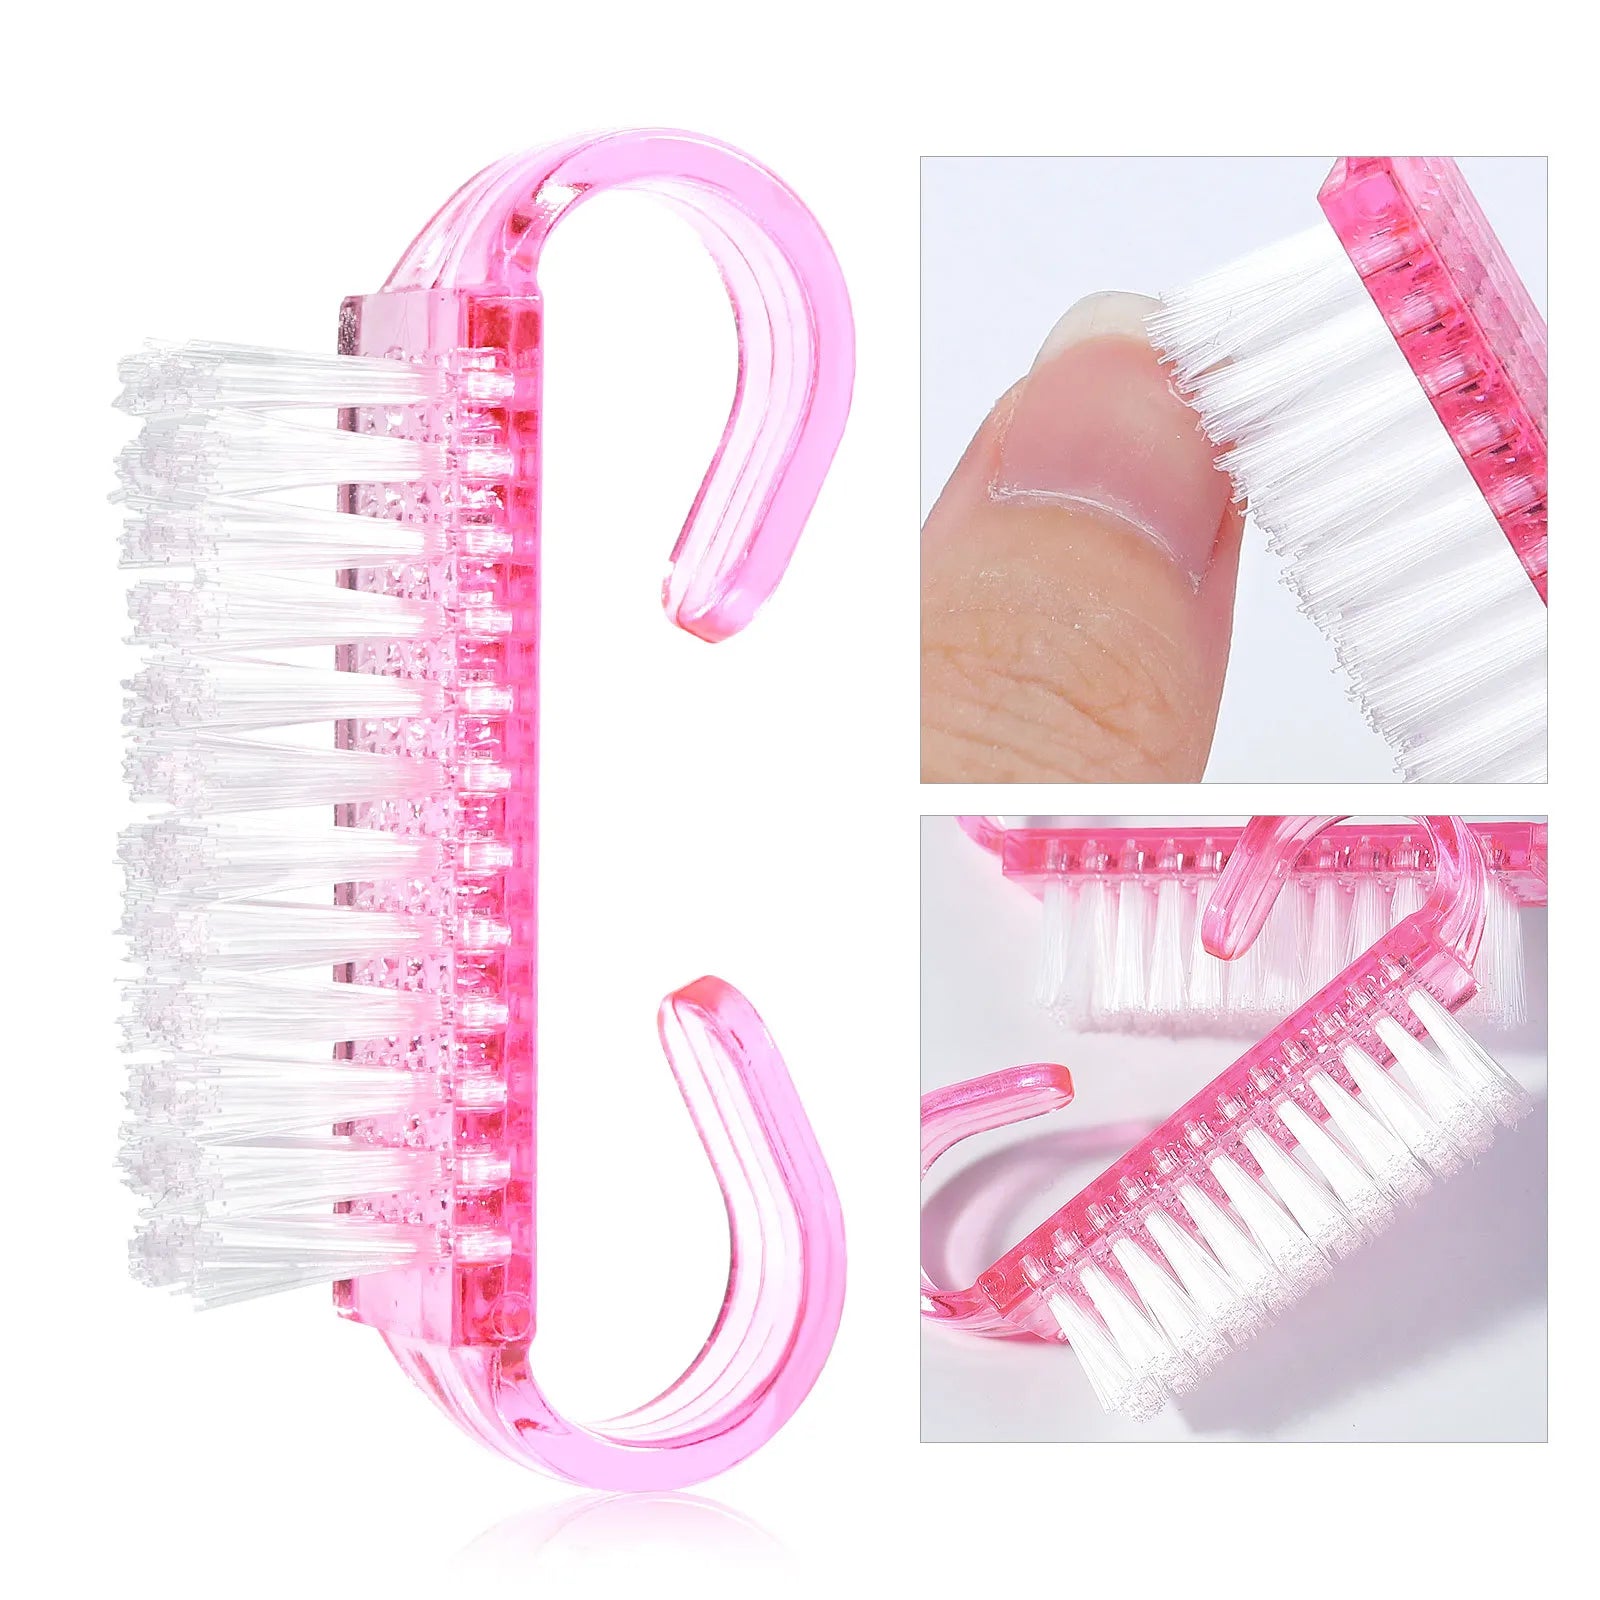 Acrylic Nail Brush Set: Professional Dust Removal & Cleaning Essentials